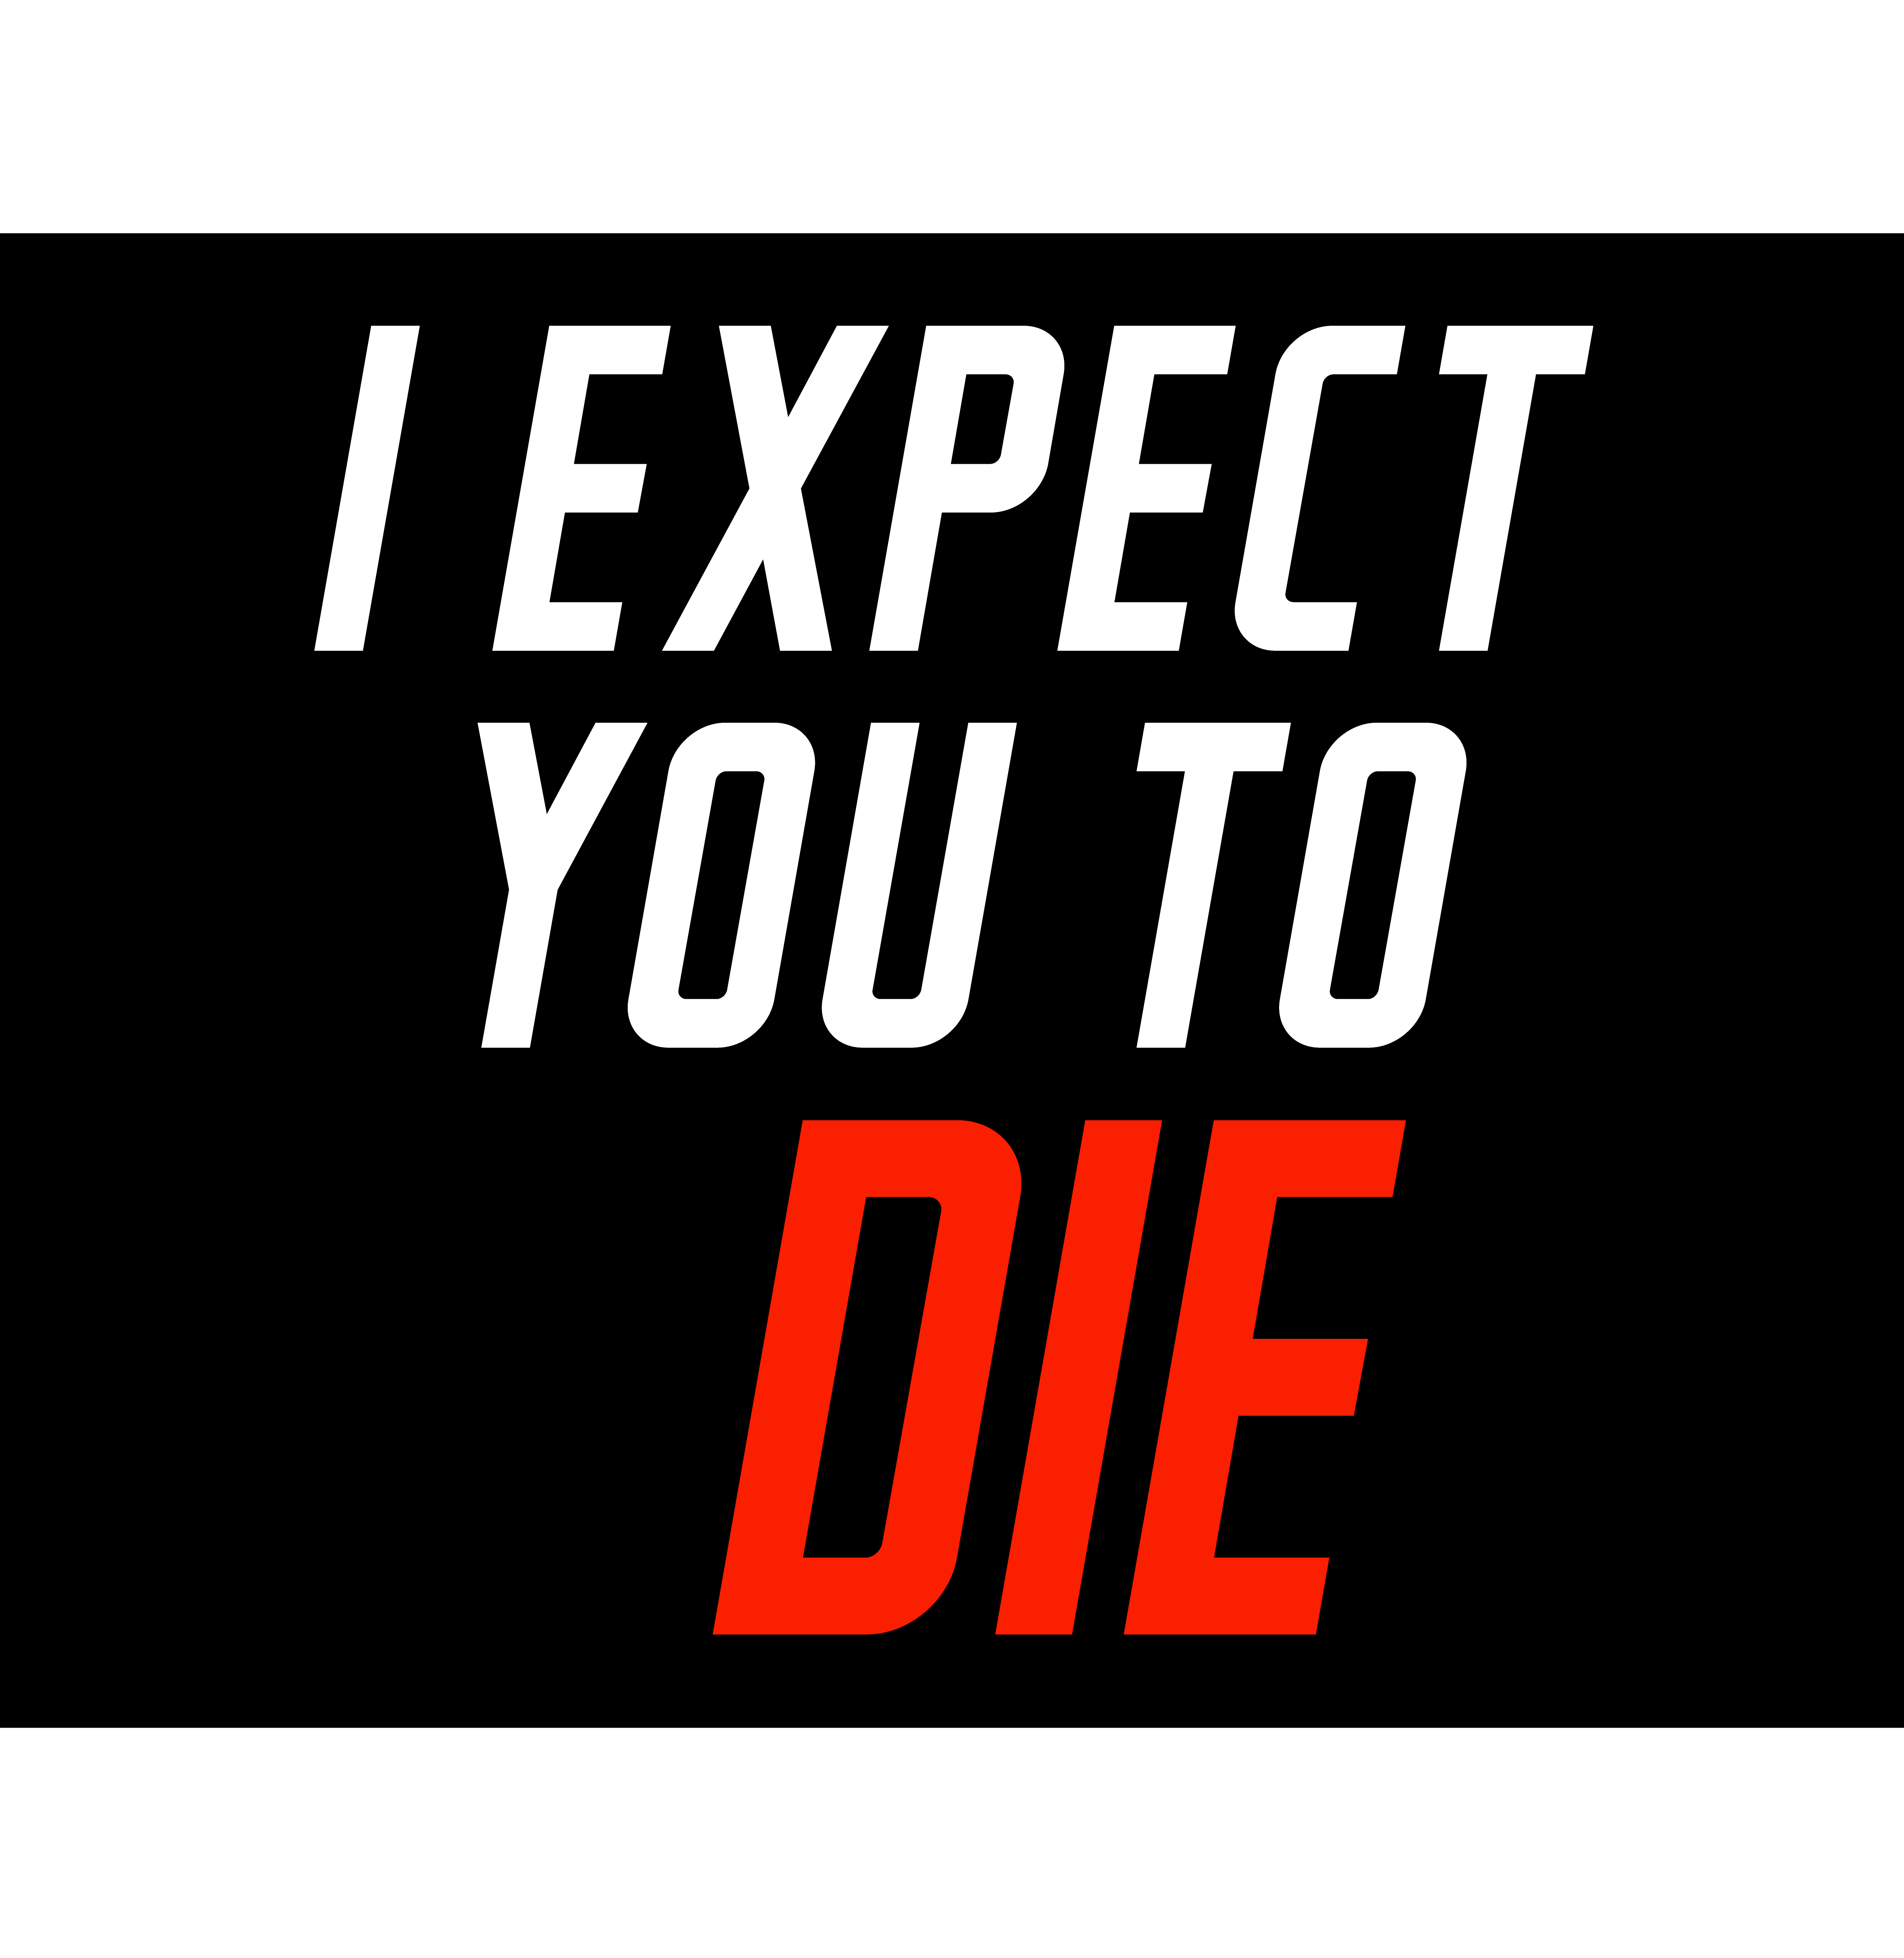 I expect you to die стим фото 54